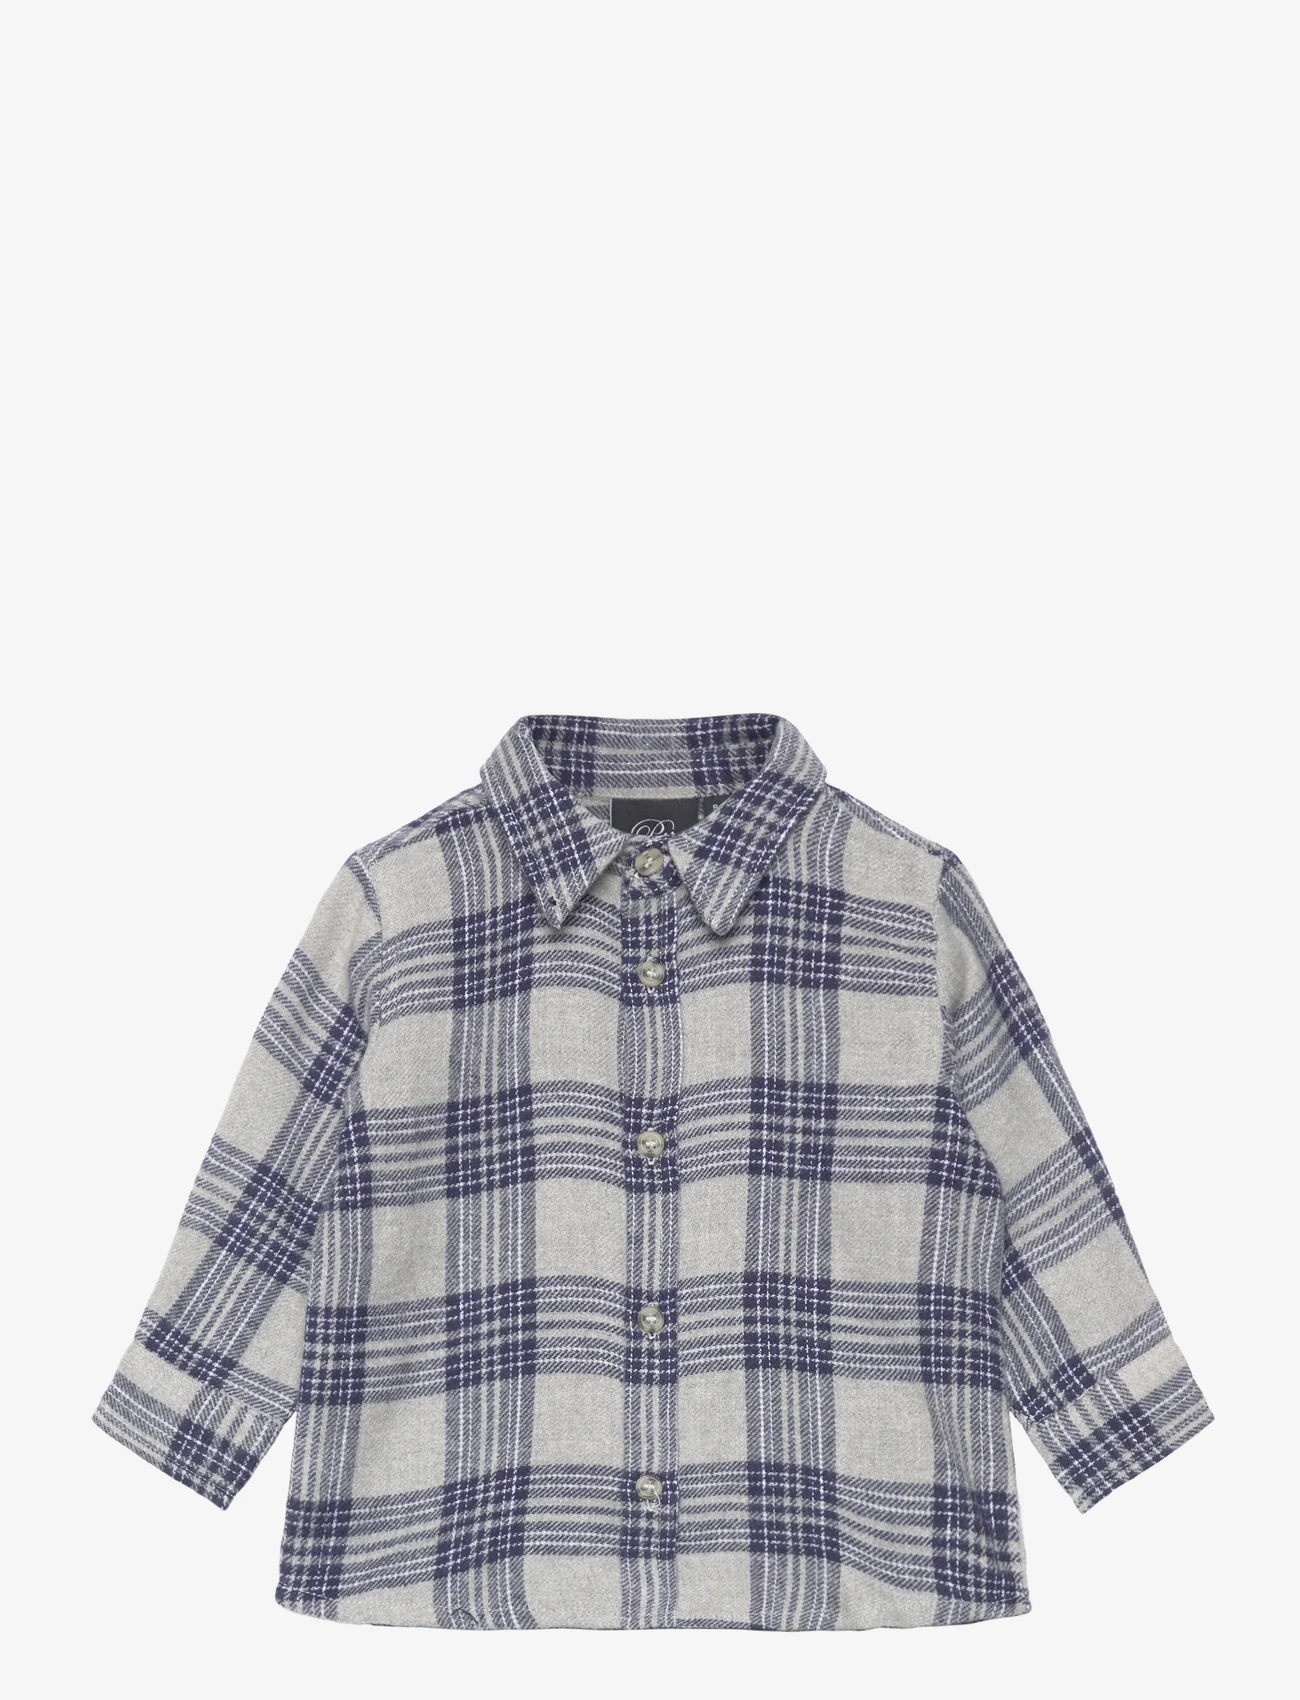 Sofie Schnoor Baby and Kids - Shirt - long-sleeved shirts - grey check - 0